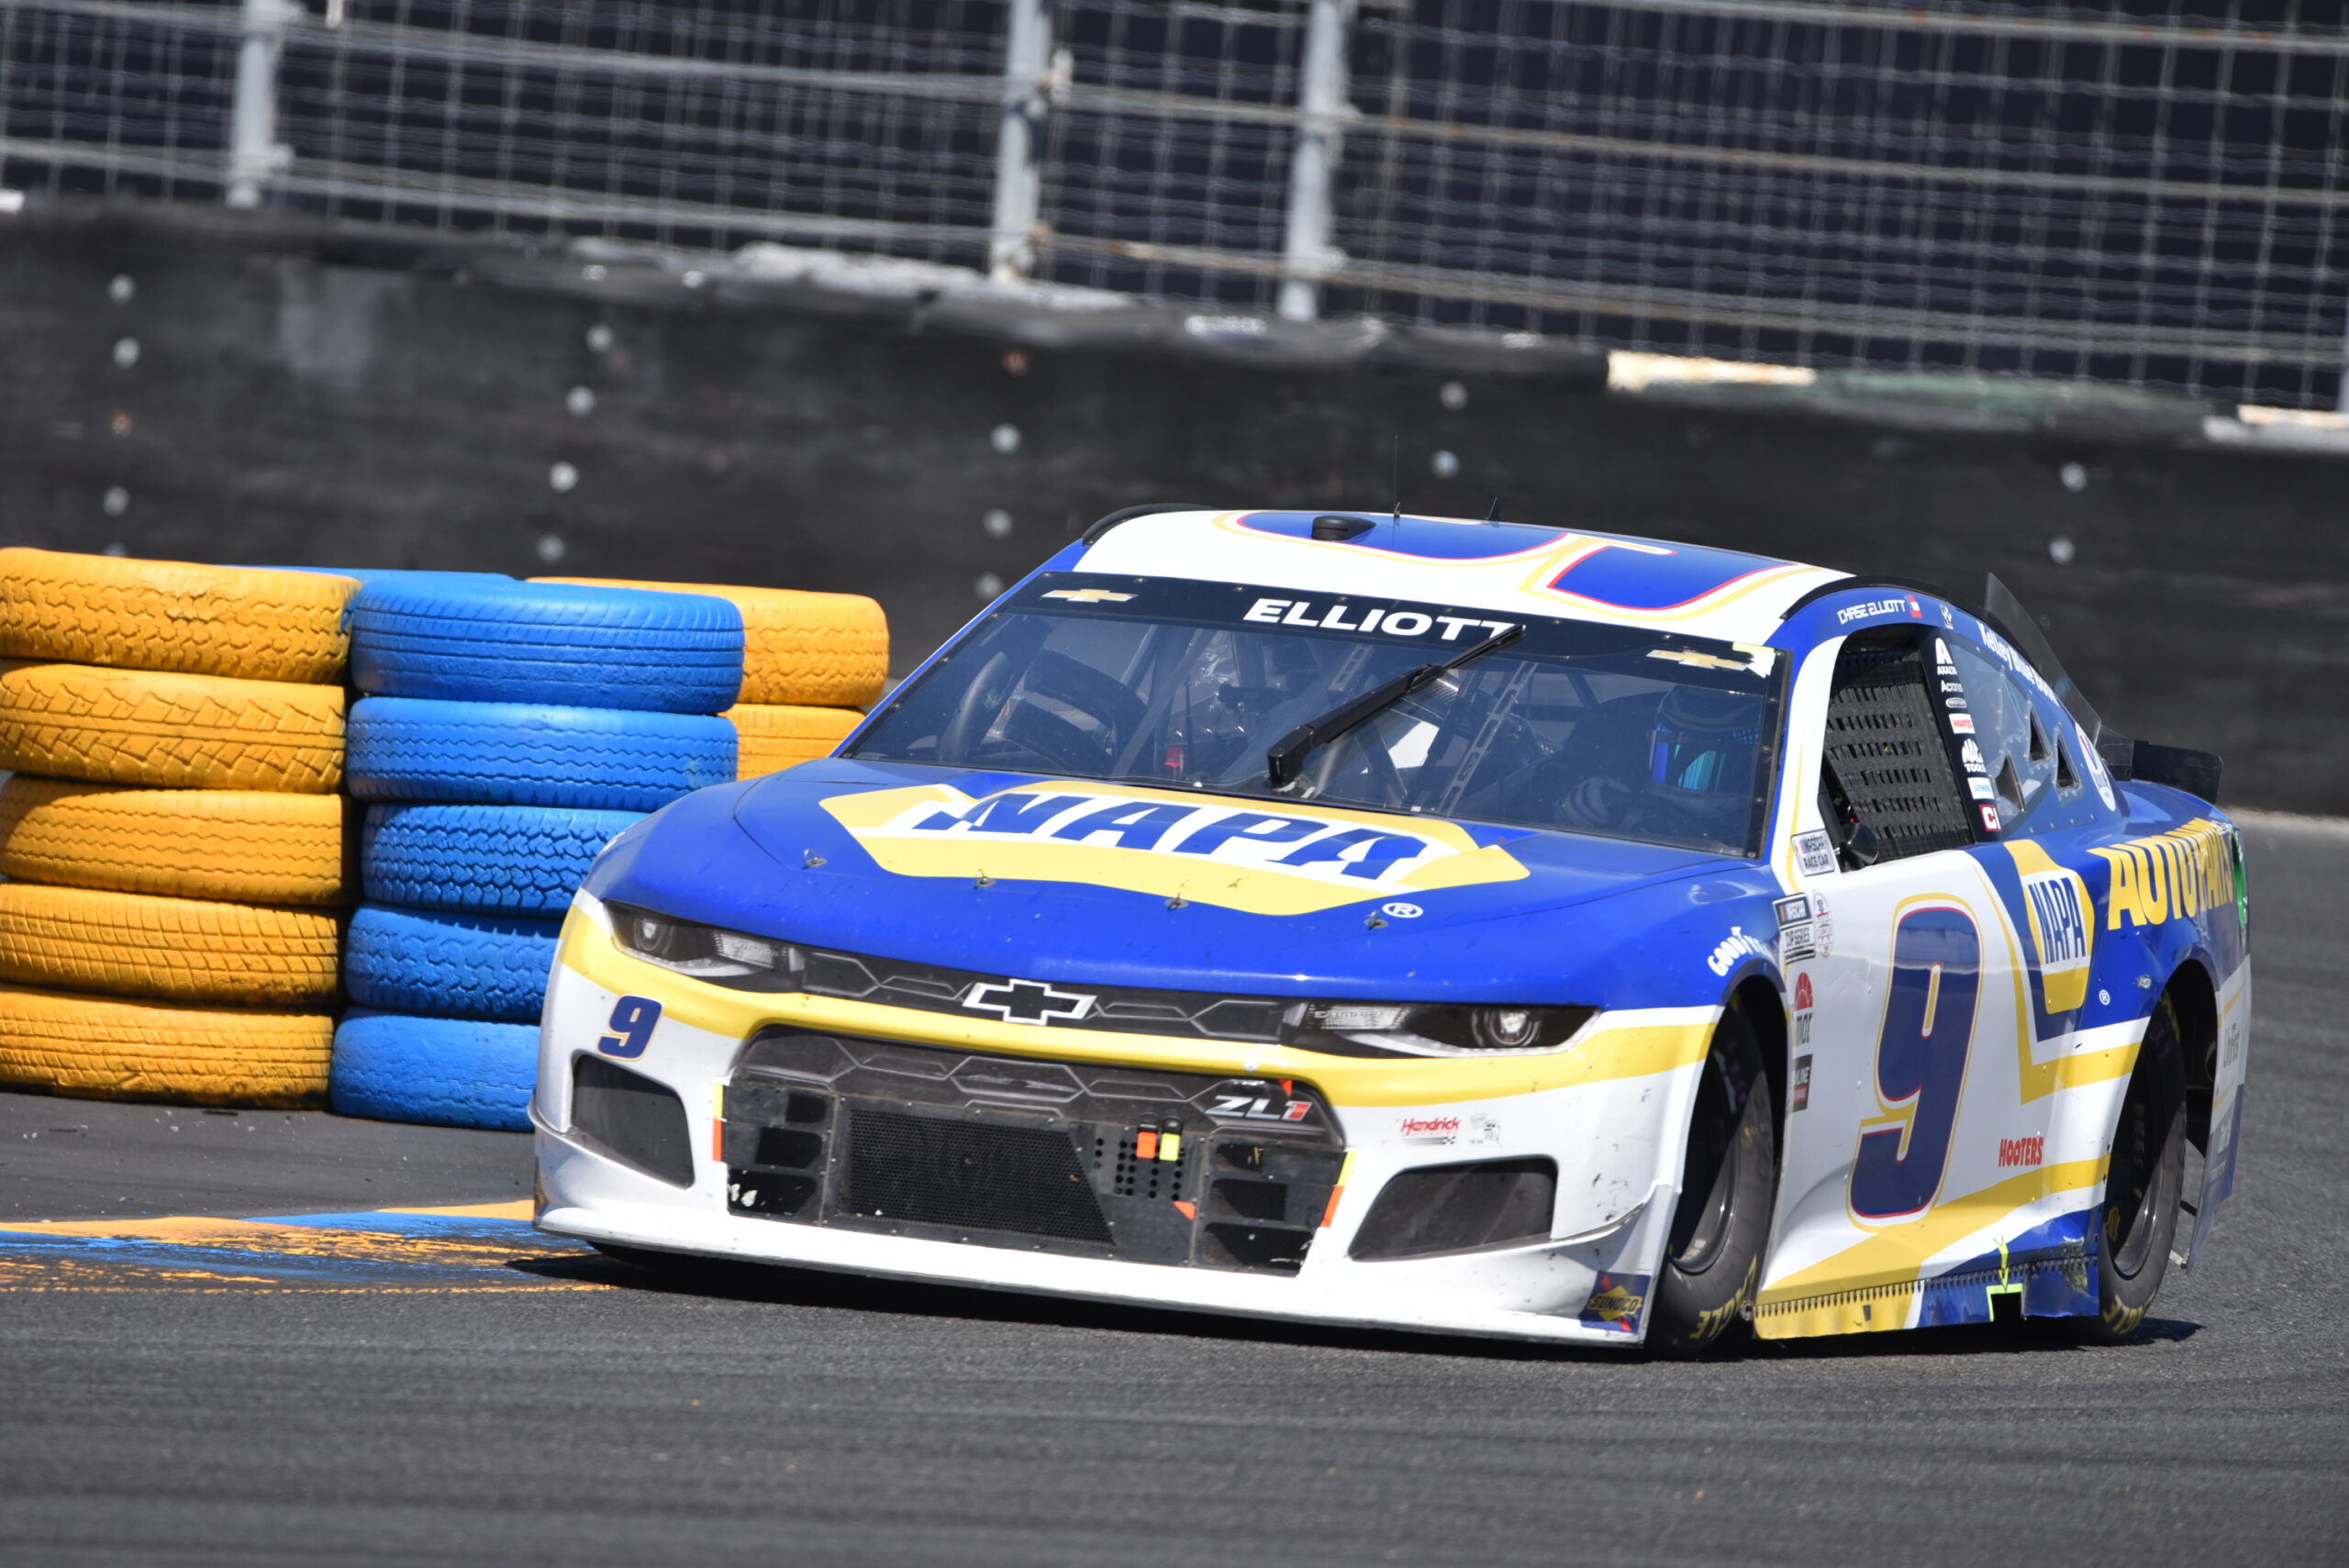 In spite of another runner up, Chase Elliott continued his consistent ways. (Photo: Luis Torres/The Podium Finish)